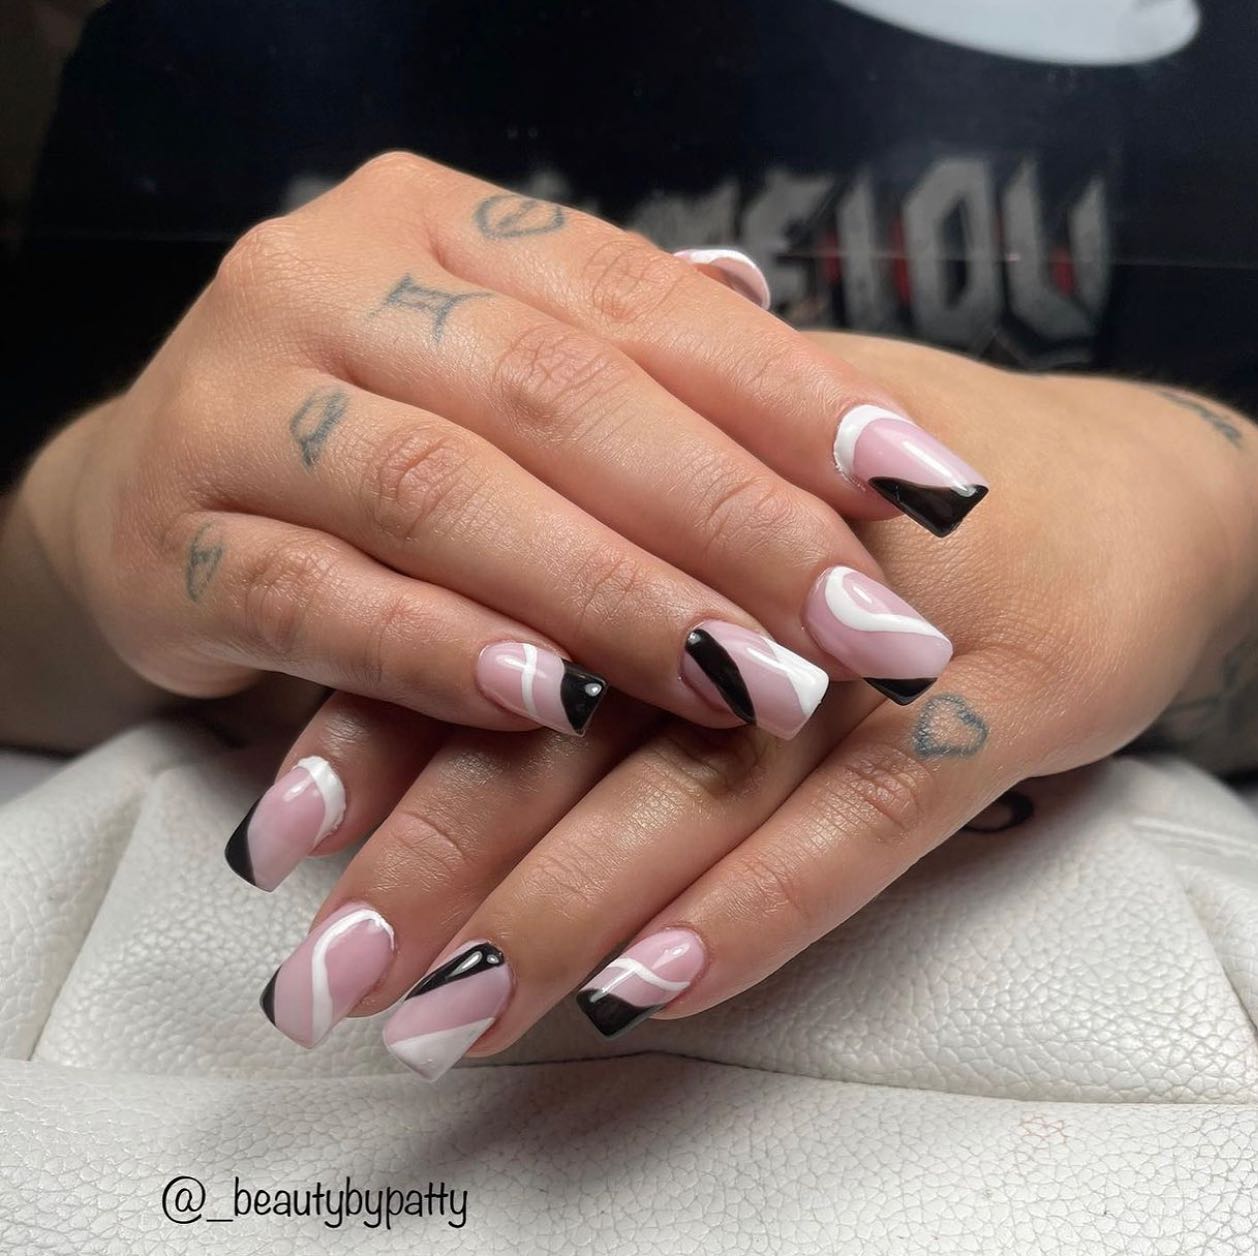 Beautiful set by our nail tech Patty! 

Make sure to call and book your mani and pedi appointments before Memorial Day! Call @michaelchristophersalondayspa salon today! 

#nailtech #delawarenails #nails #blackandwhitenails #funnails #acrylicnails #wilmington #greenville